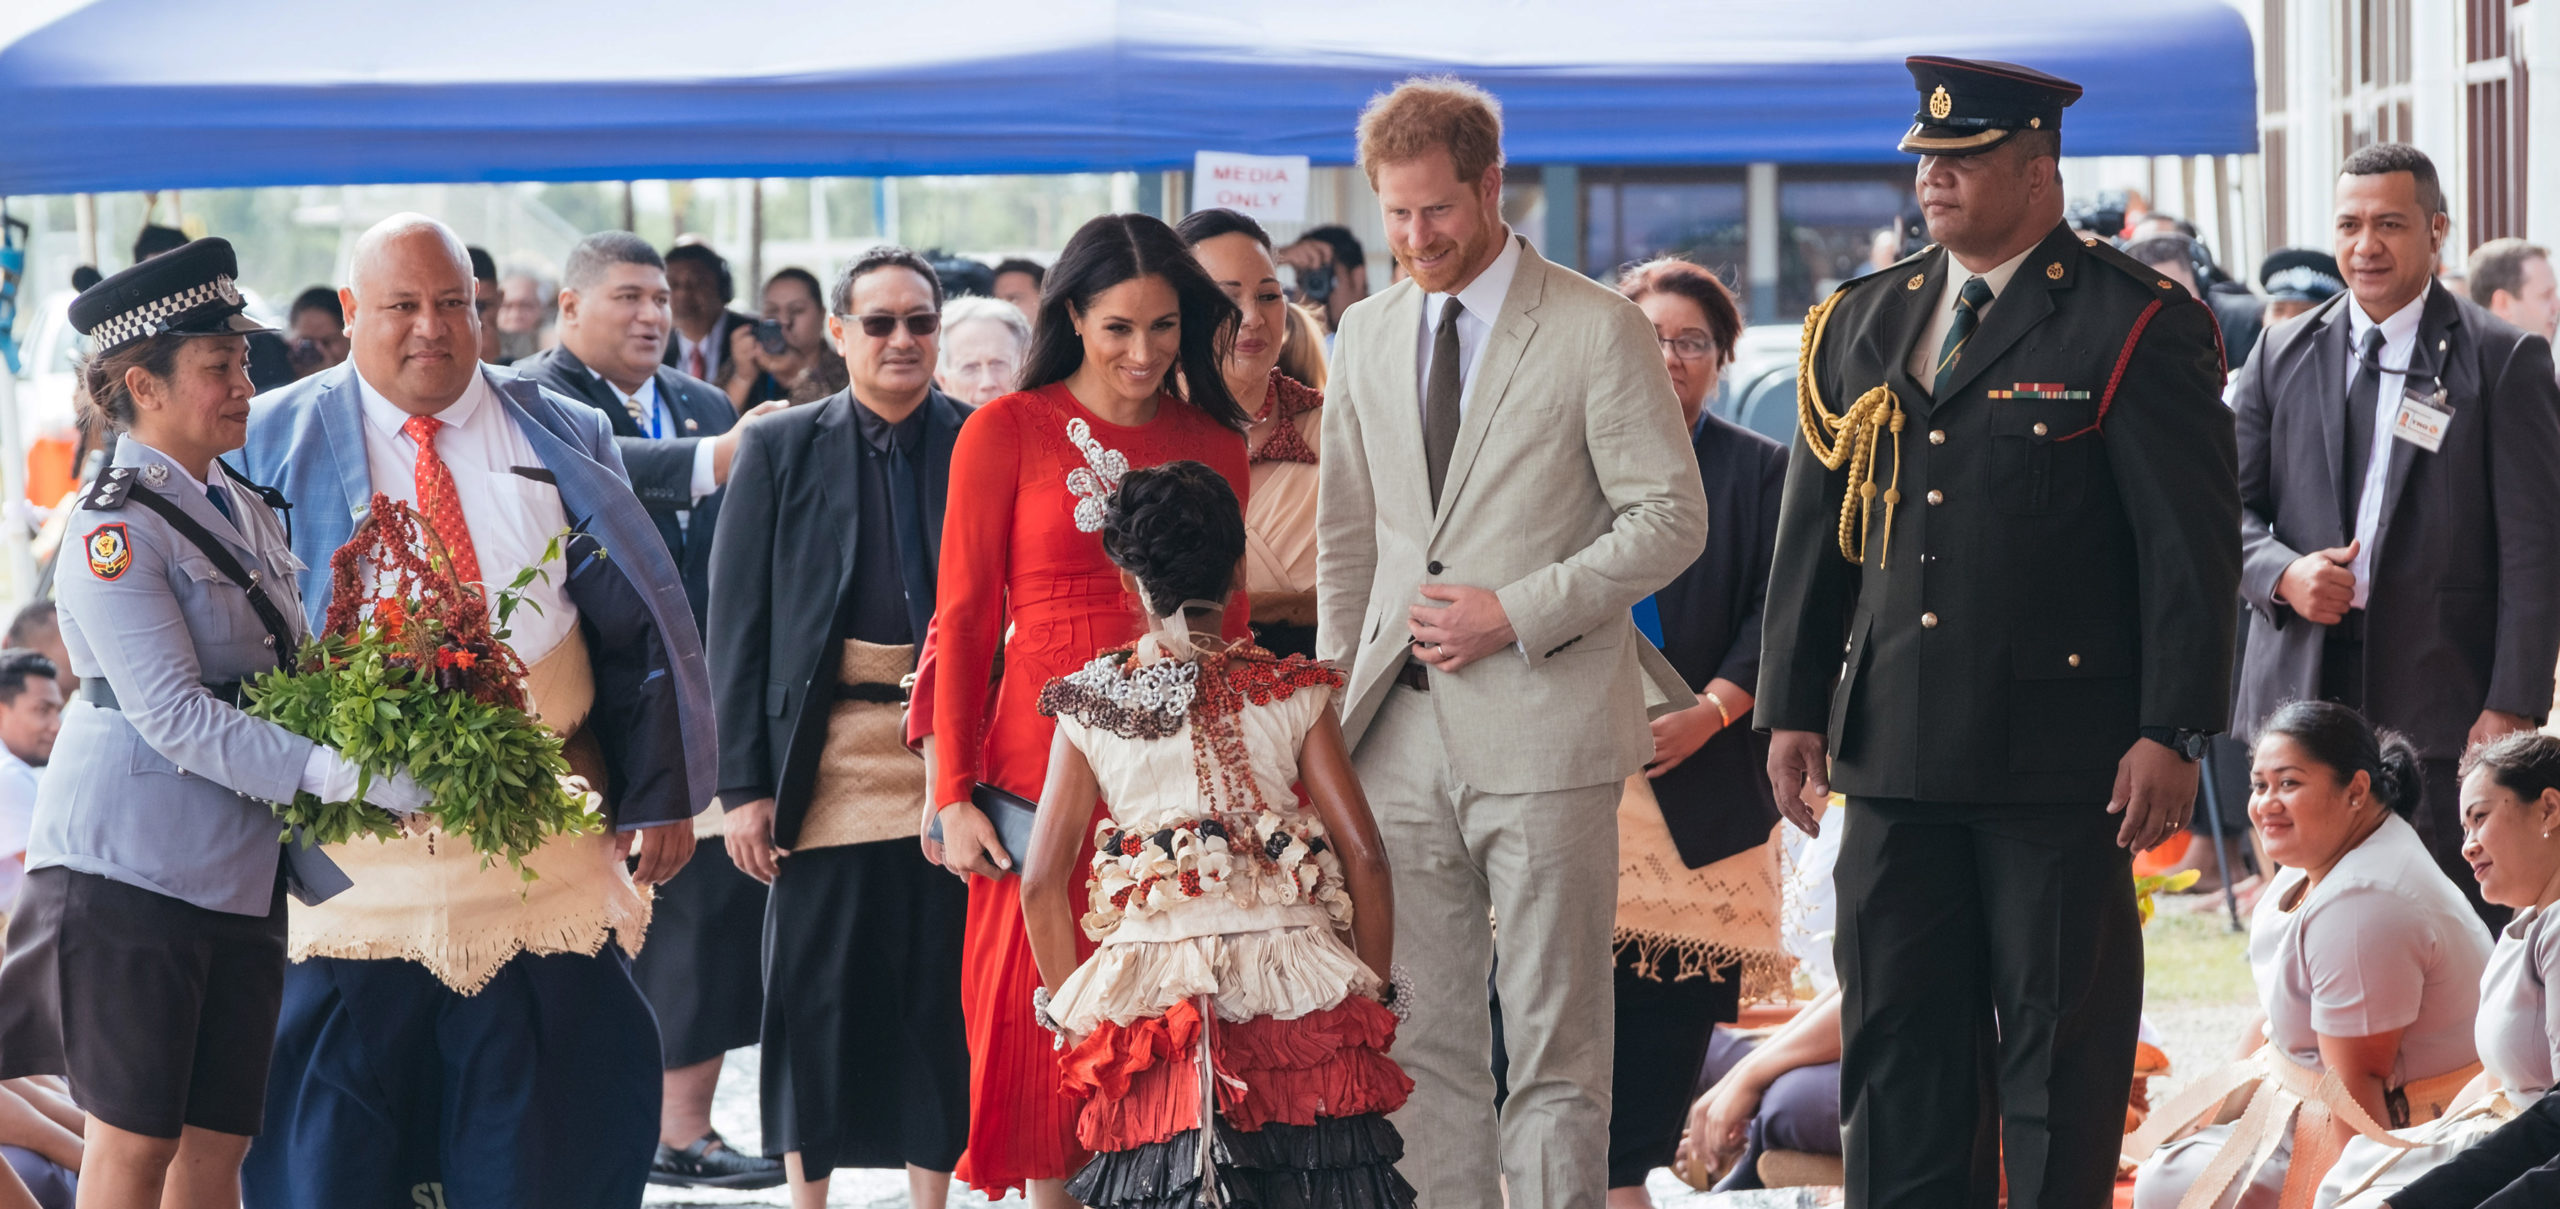 commonwealth-or-the-official-website-of-the-duke-and-amp-duchess-of-sussex